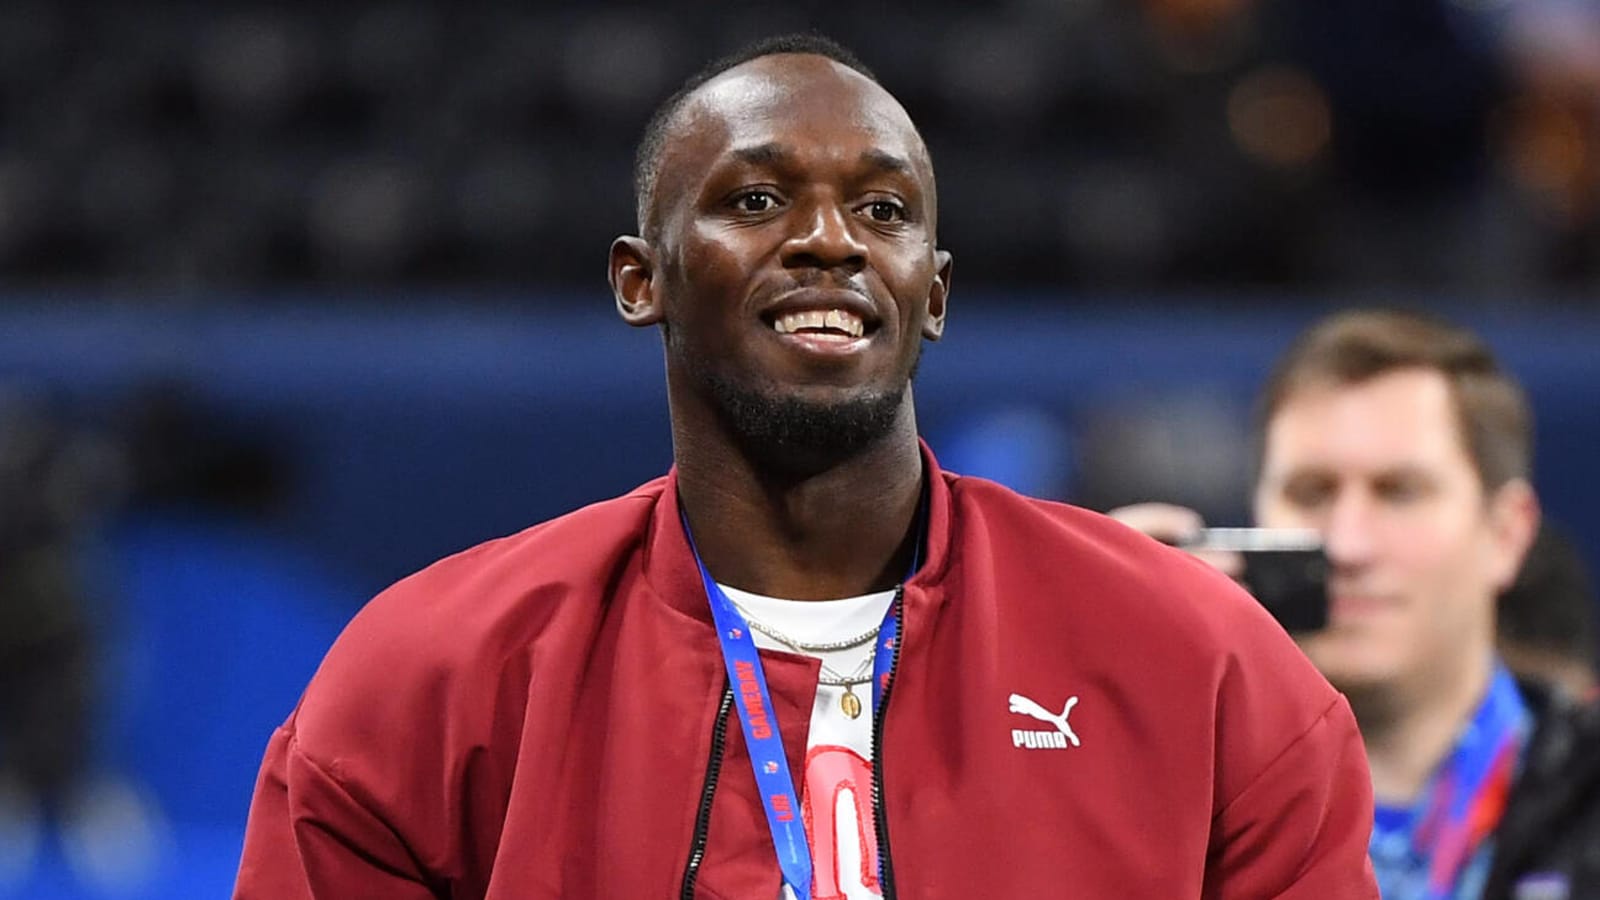 Usain Bolt names the Man United star who could beat him in a race